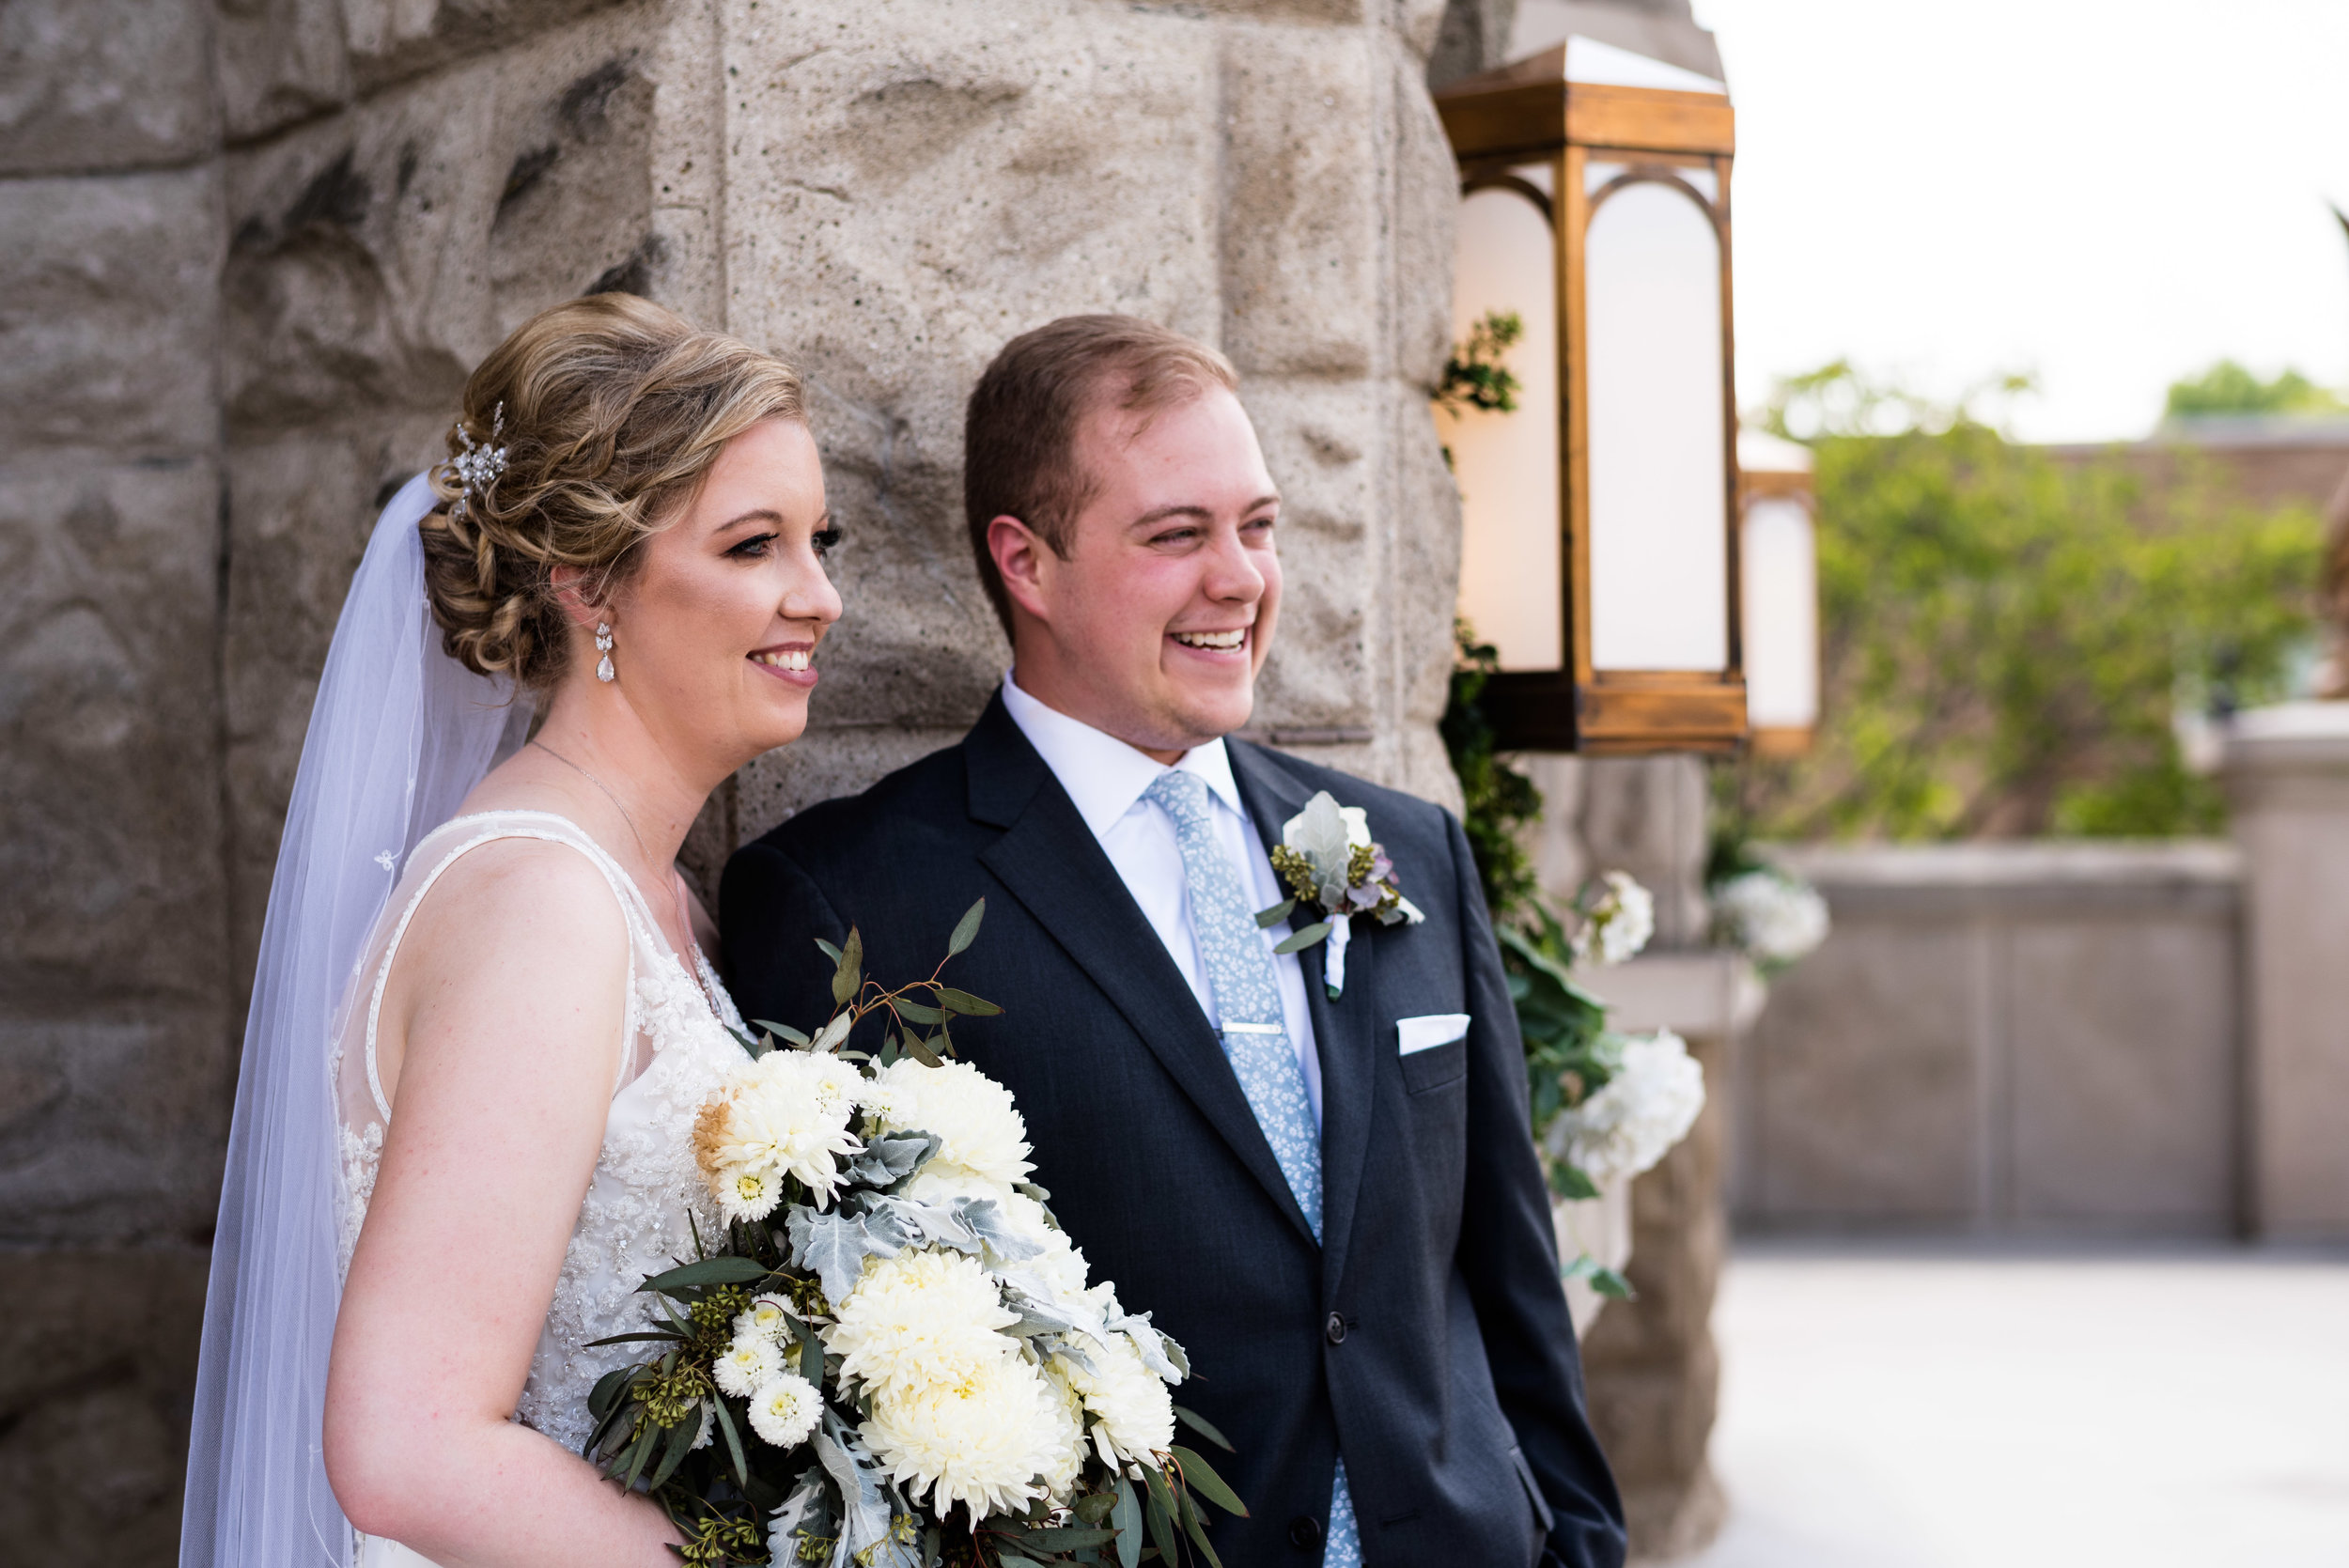 photography for weddings in findlay